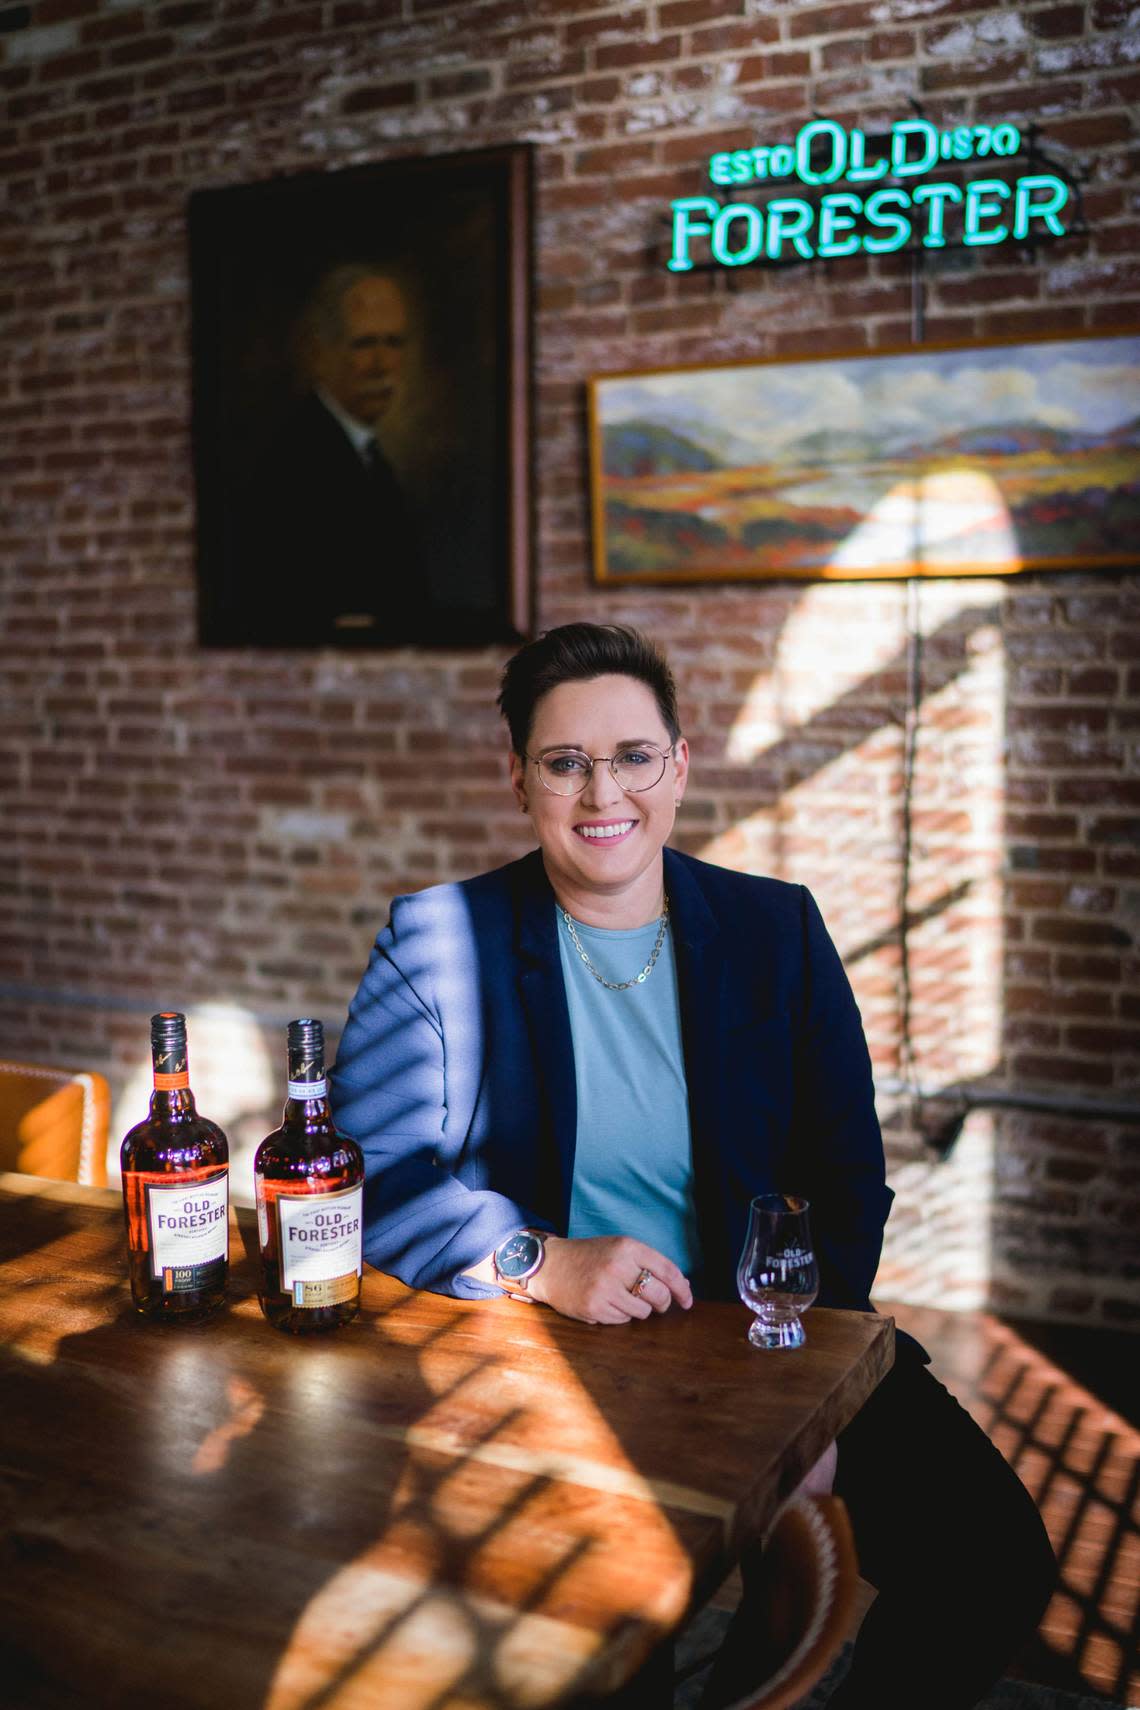 Melissa Rift, who has worked at Beam Suntory and Bulleit Distilling, has been named the new face of Old Forester, Brown-Forman’s oldest bourbon brand.